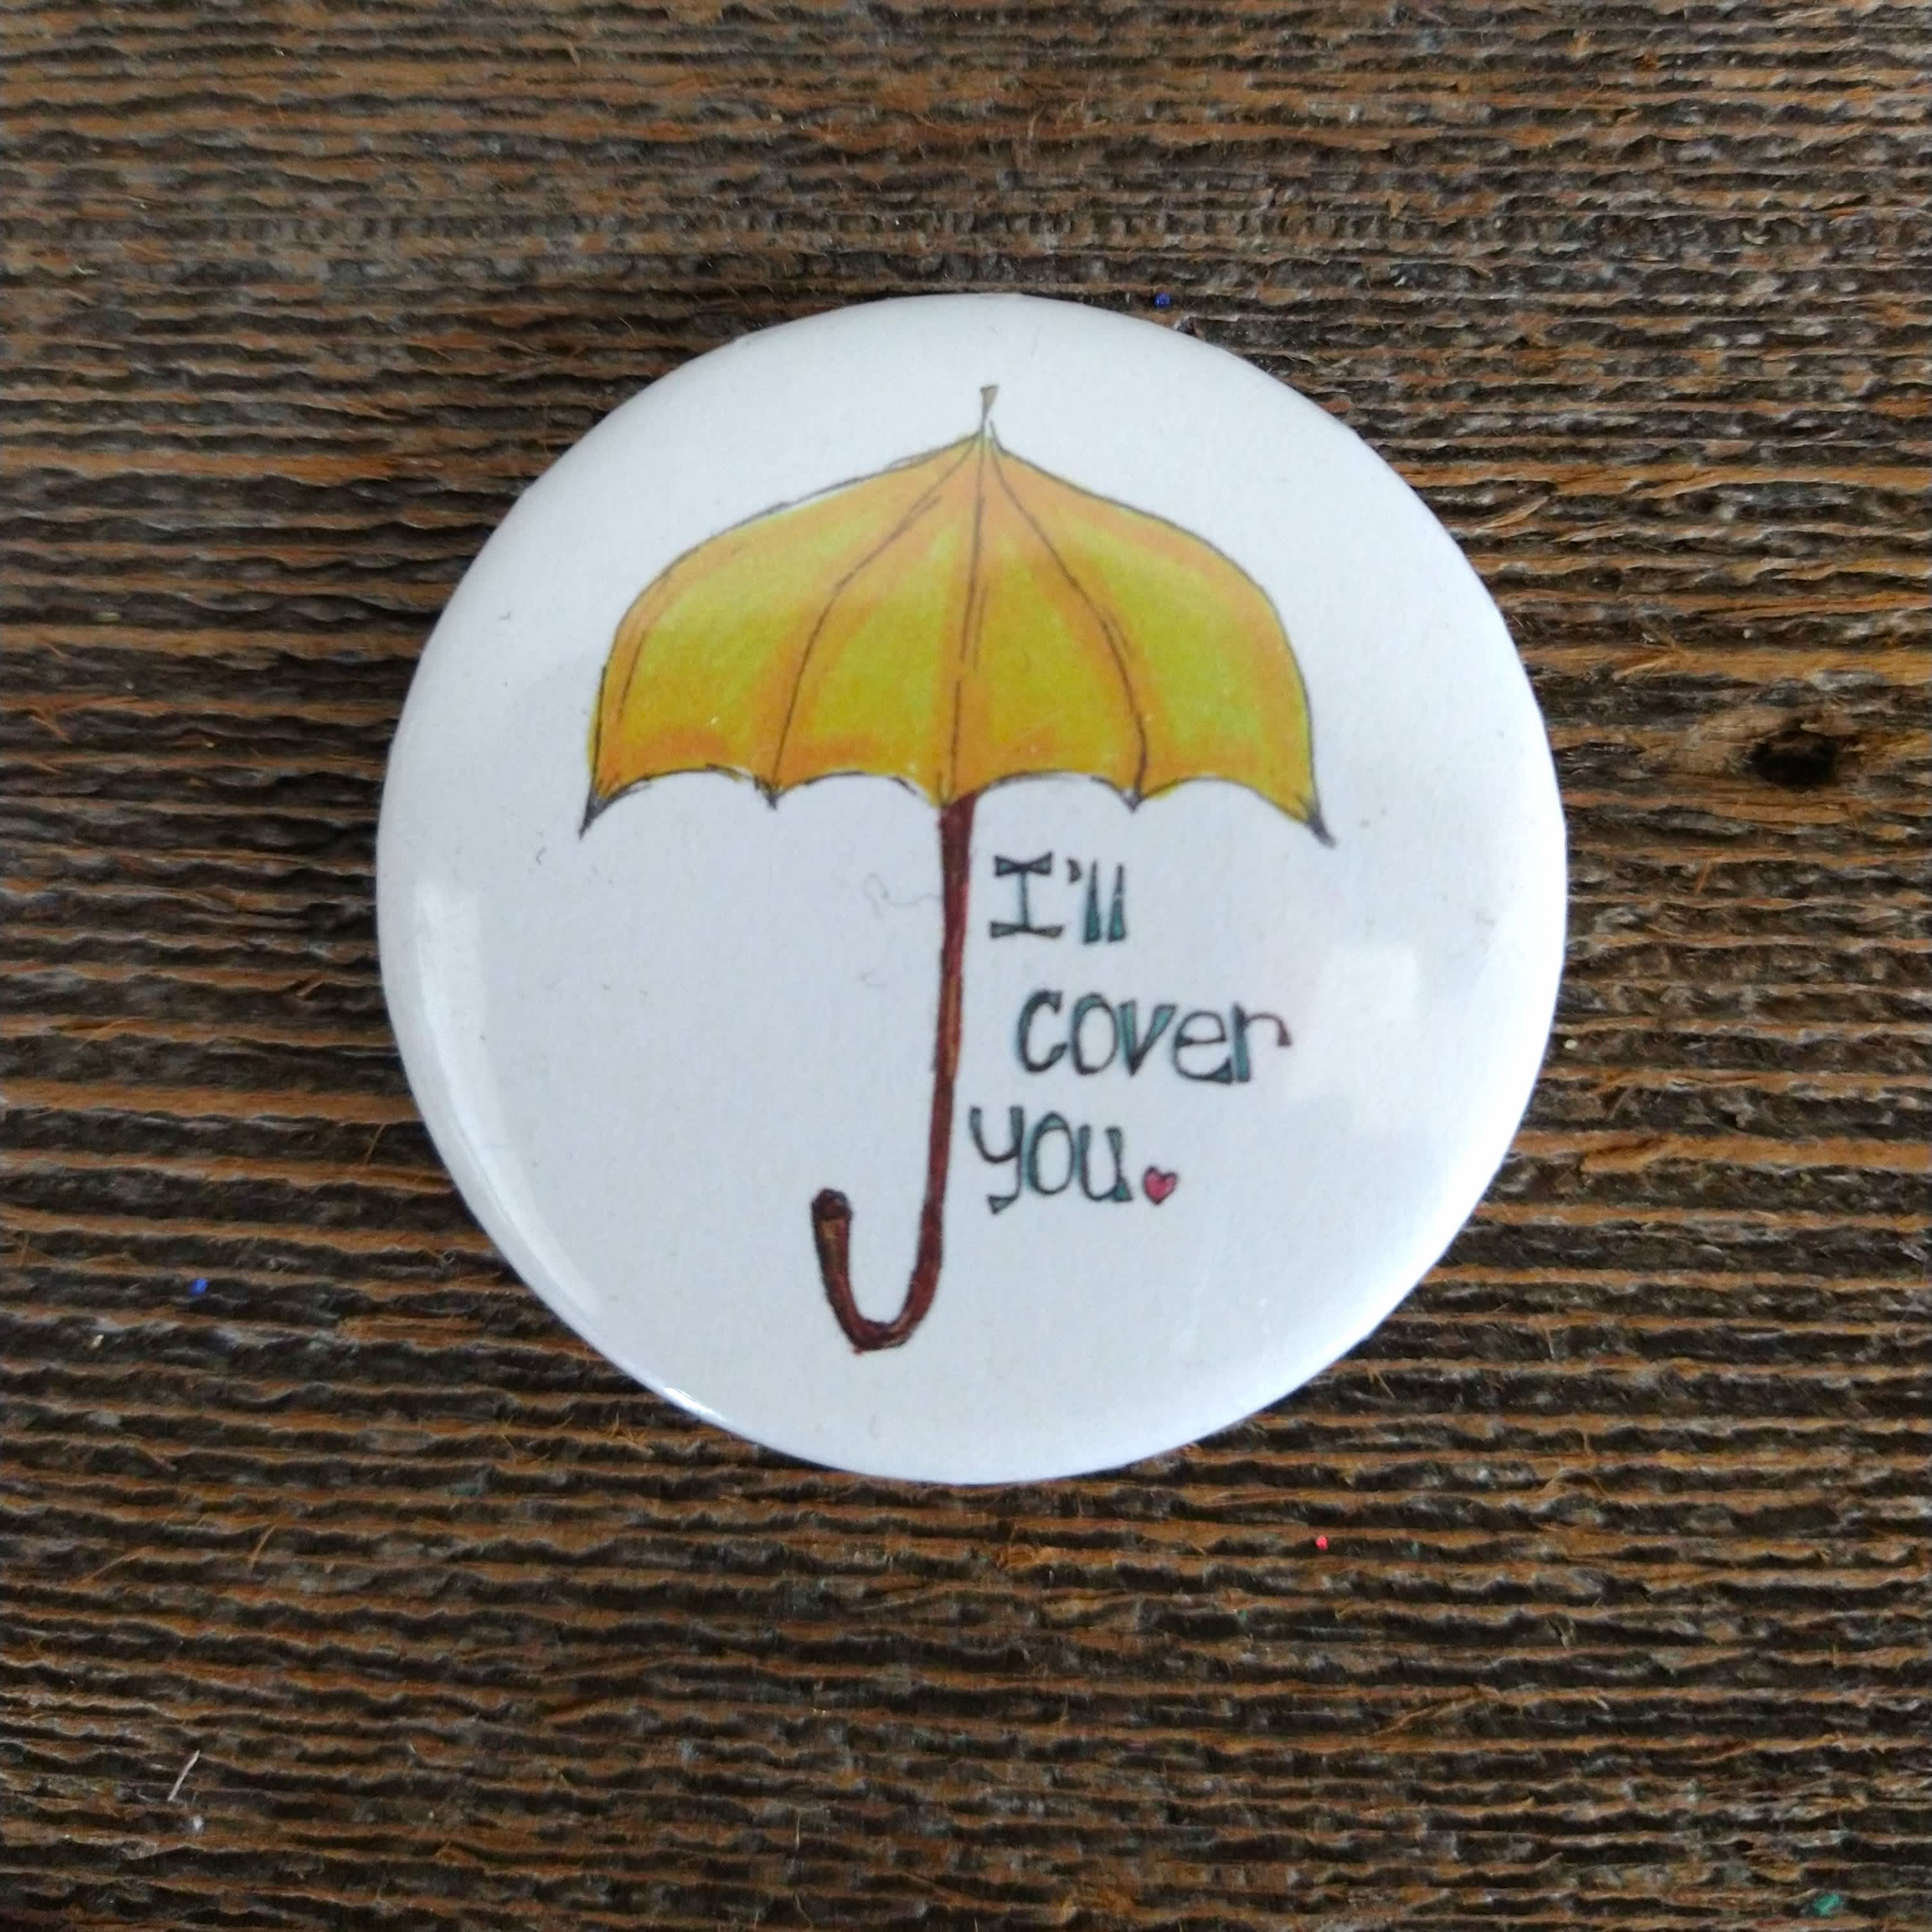 Cover You Umbrella Pin - Hand-made buttons created by a Courtney Calkins, a Humboldt native. 